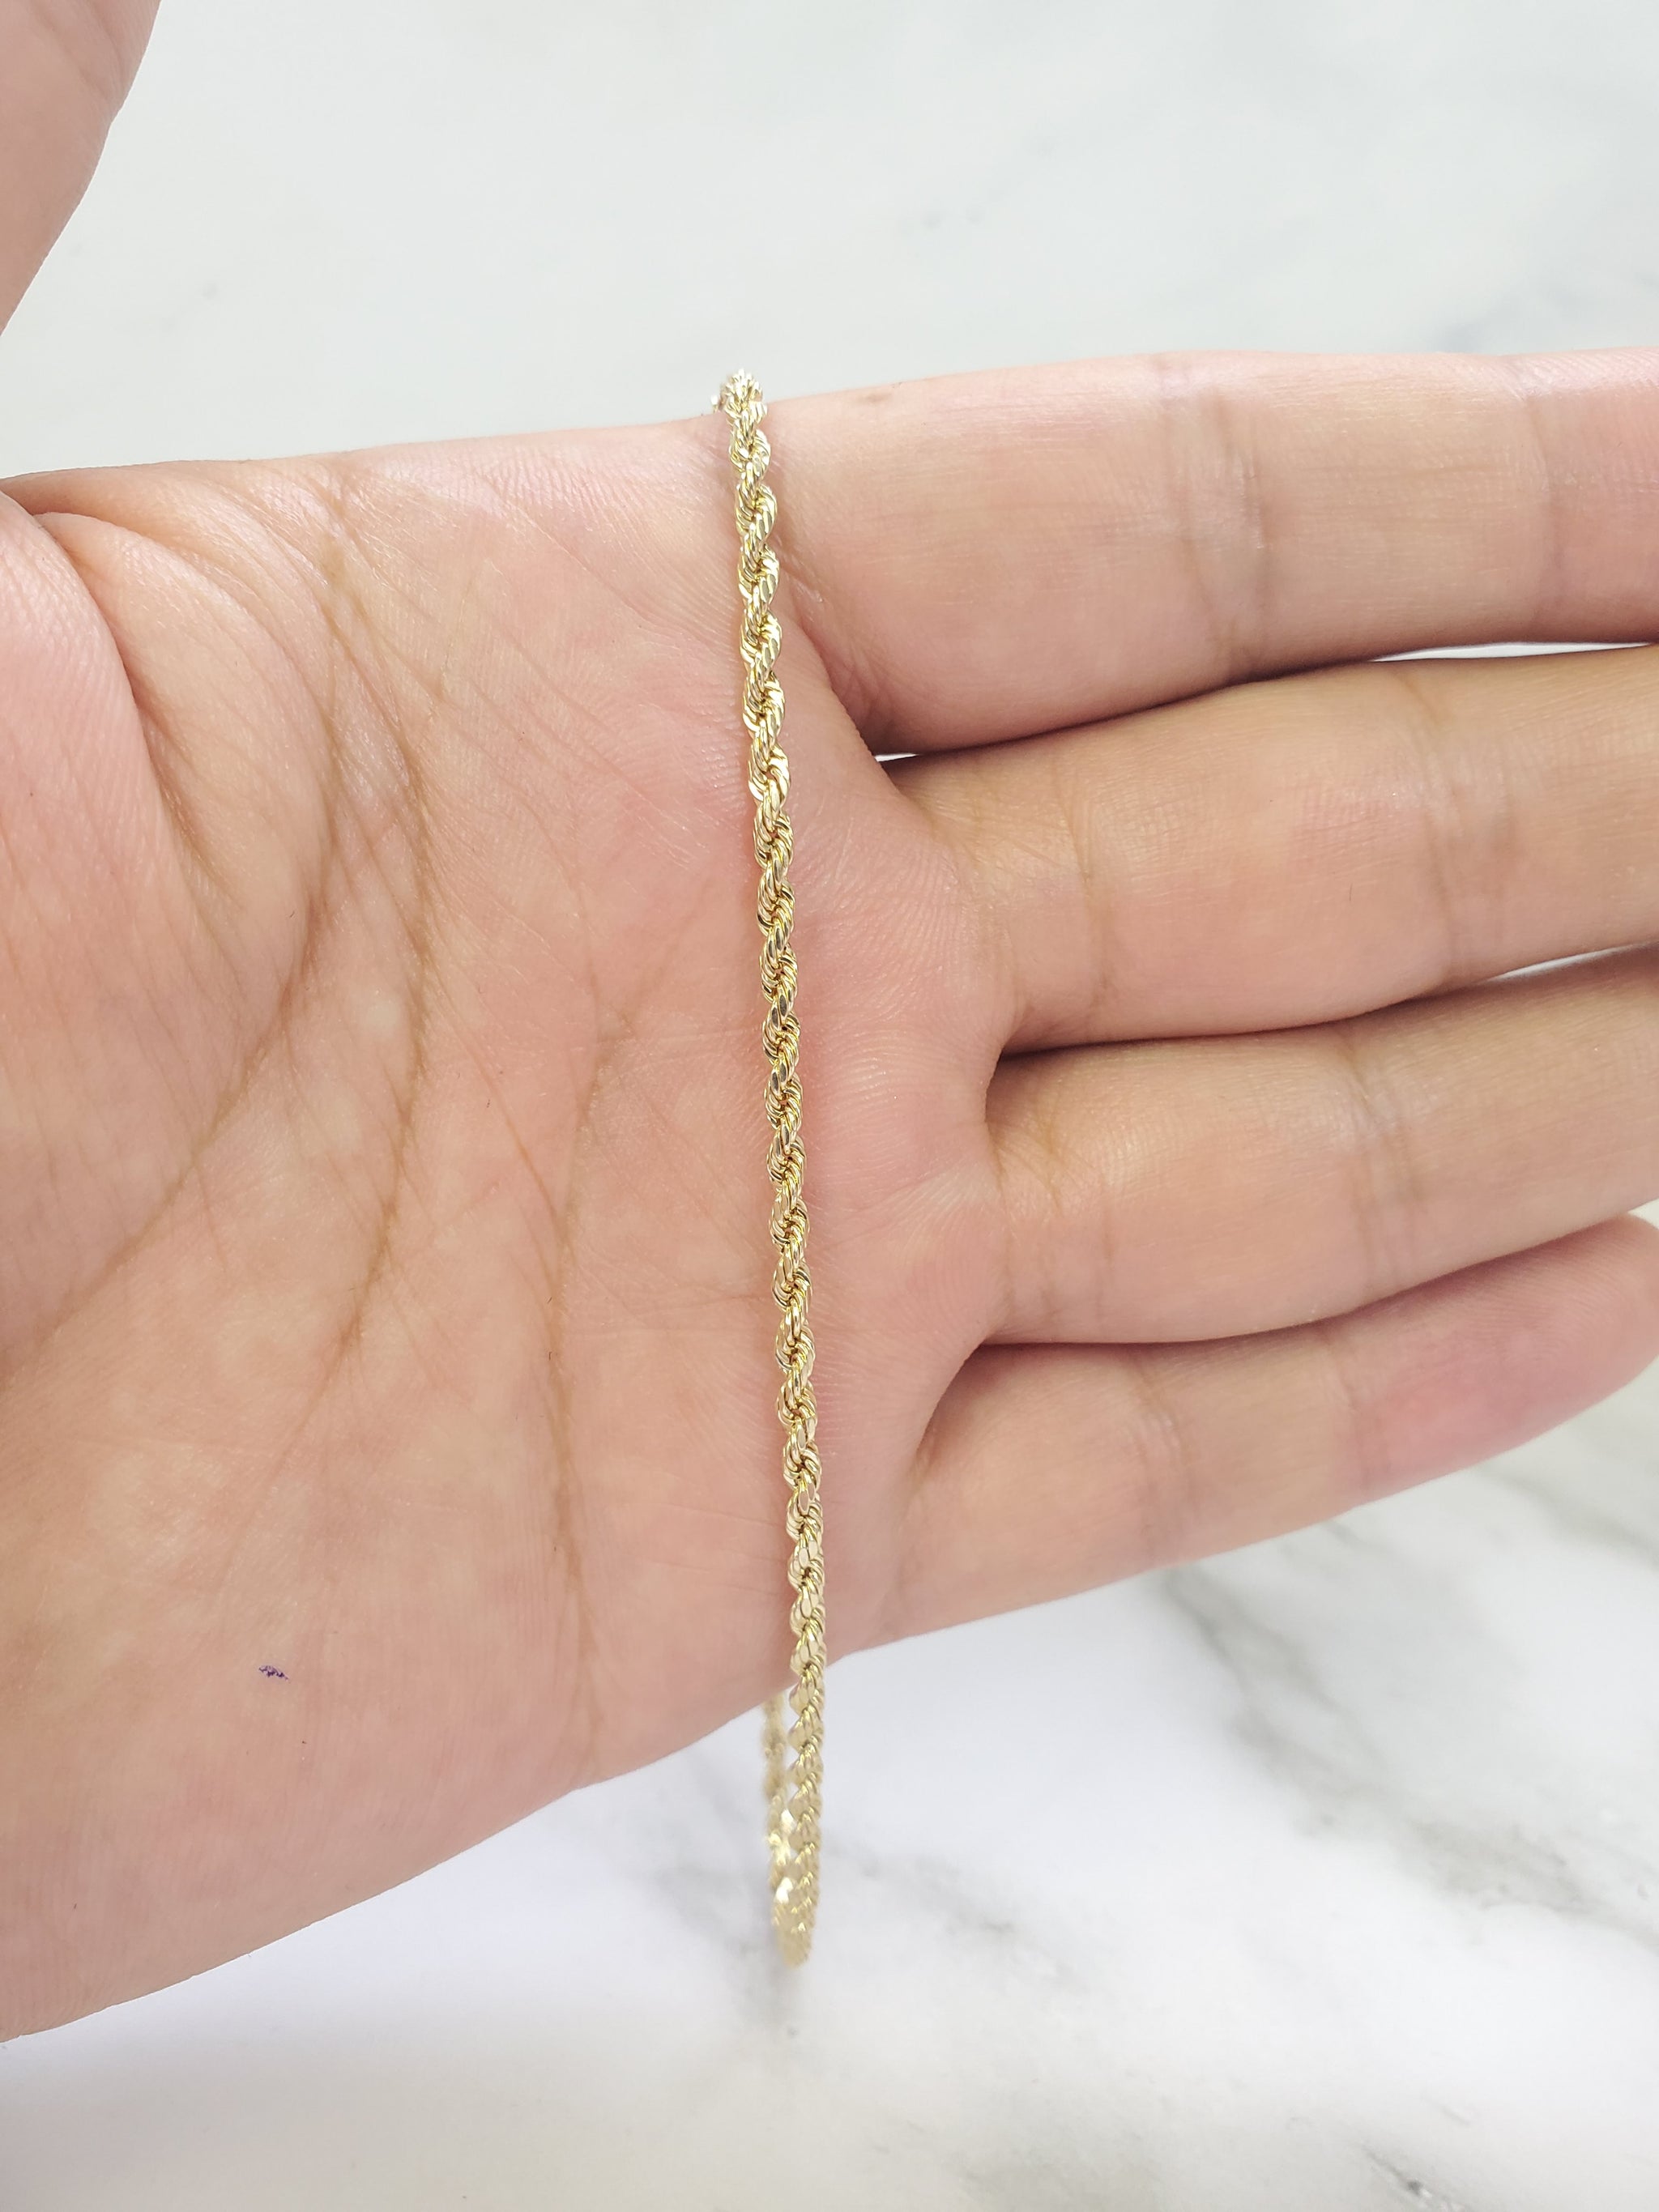 14K Yellow Gold Rope Chain Necklace 5mm -Unisex 22,24,26 Inch